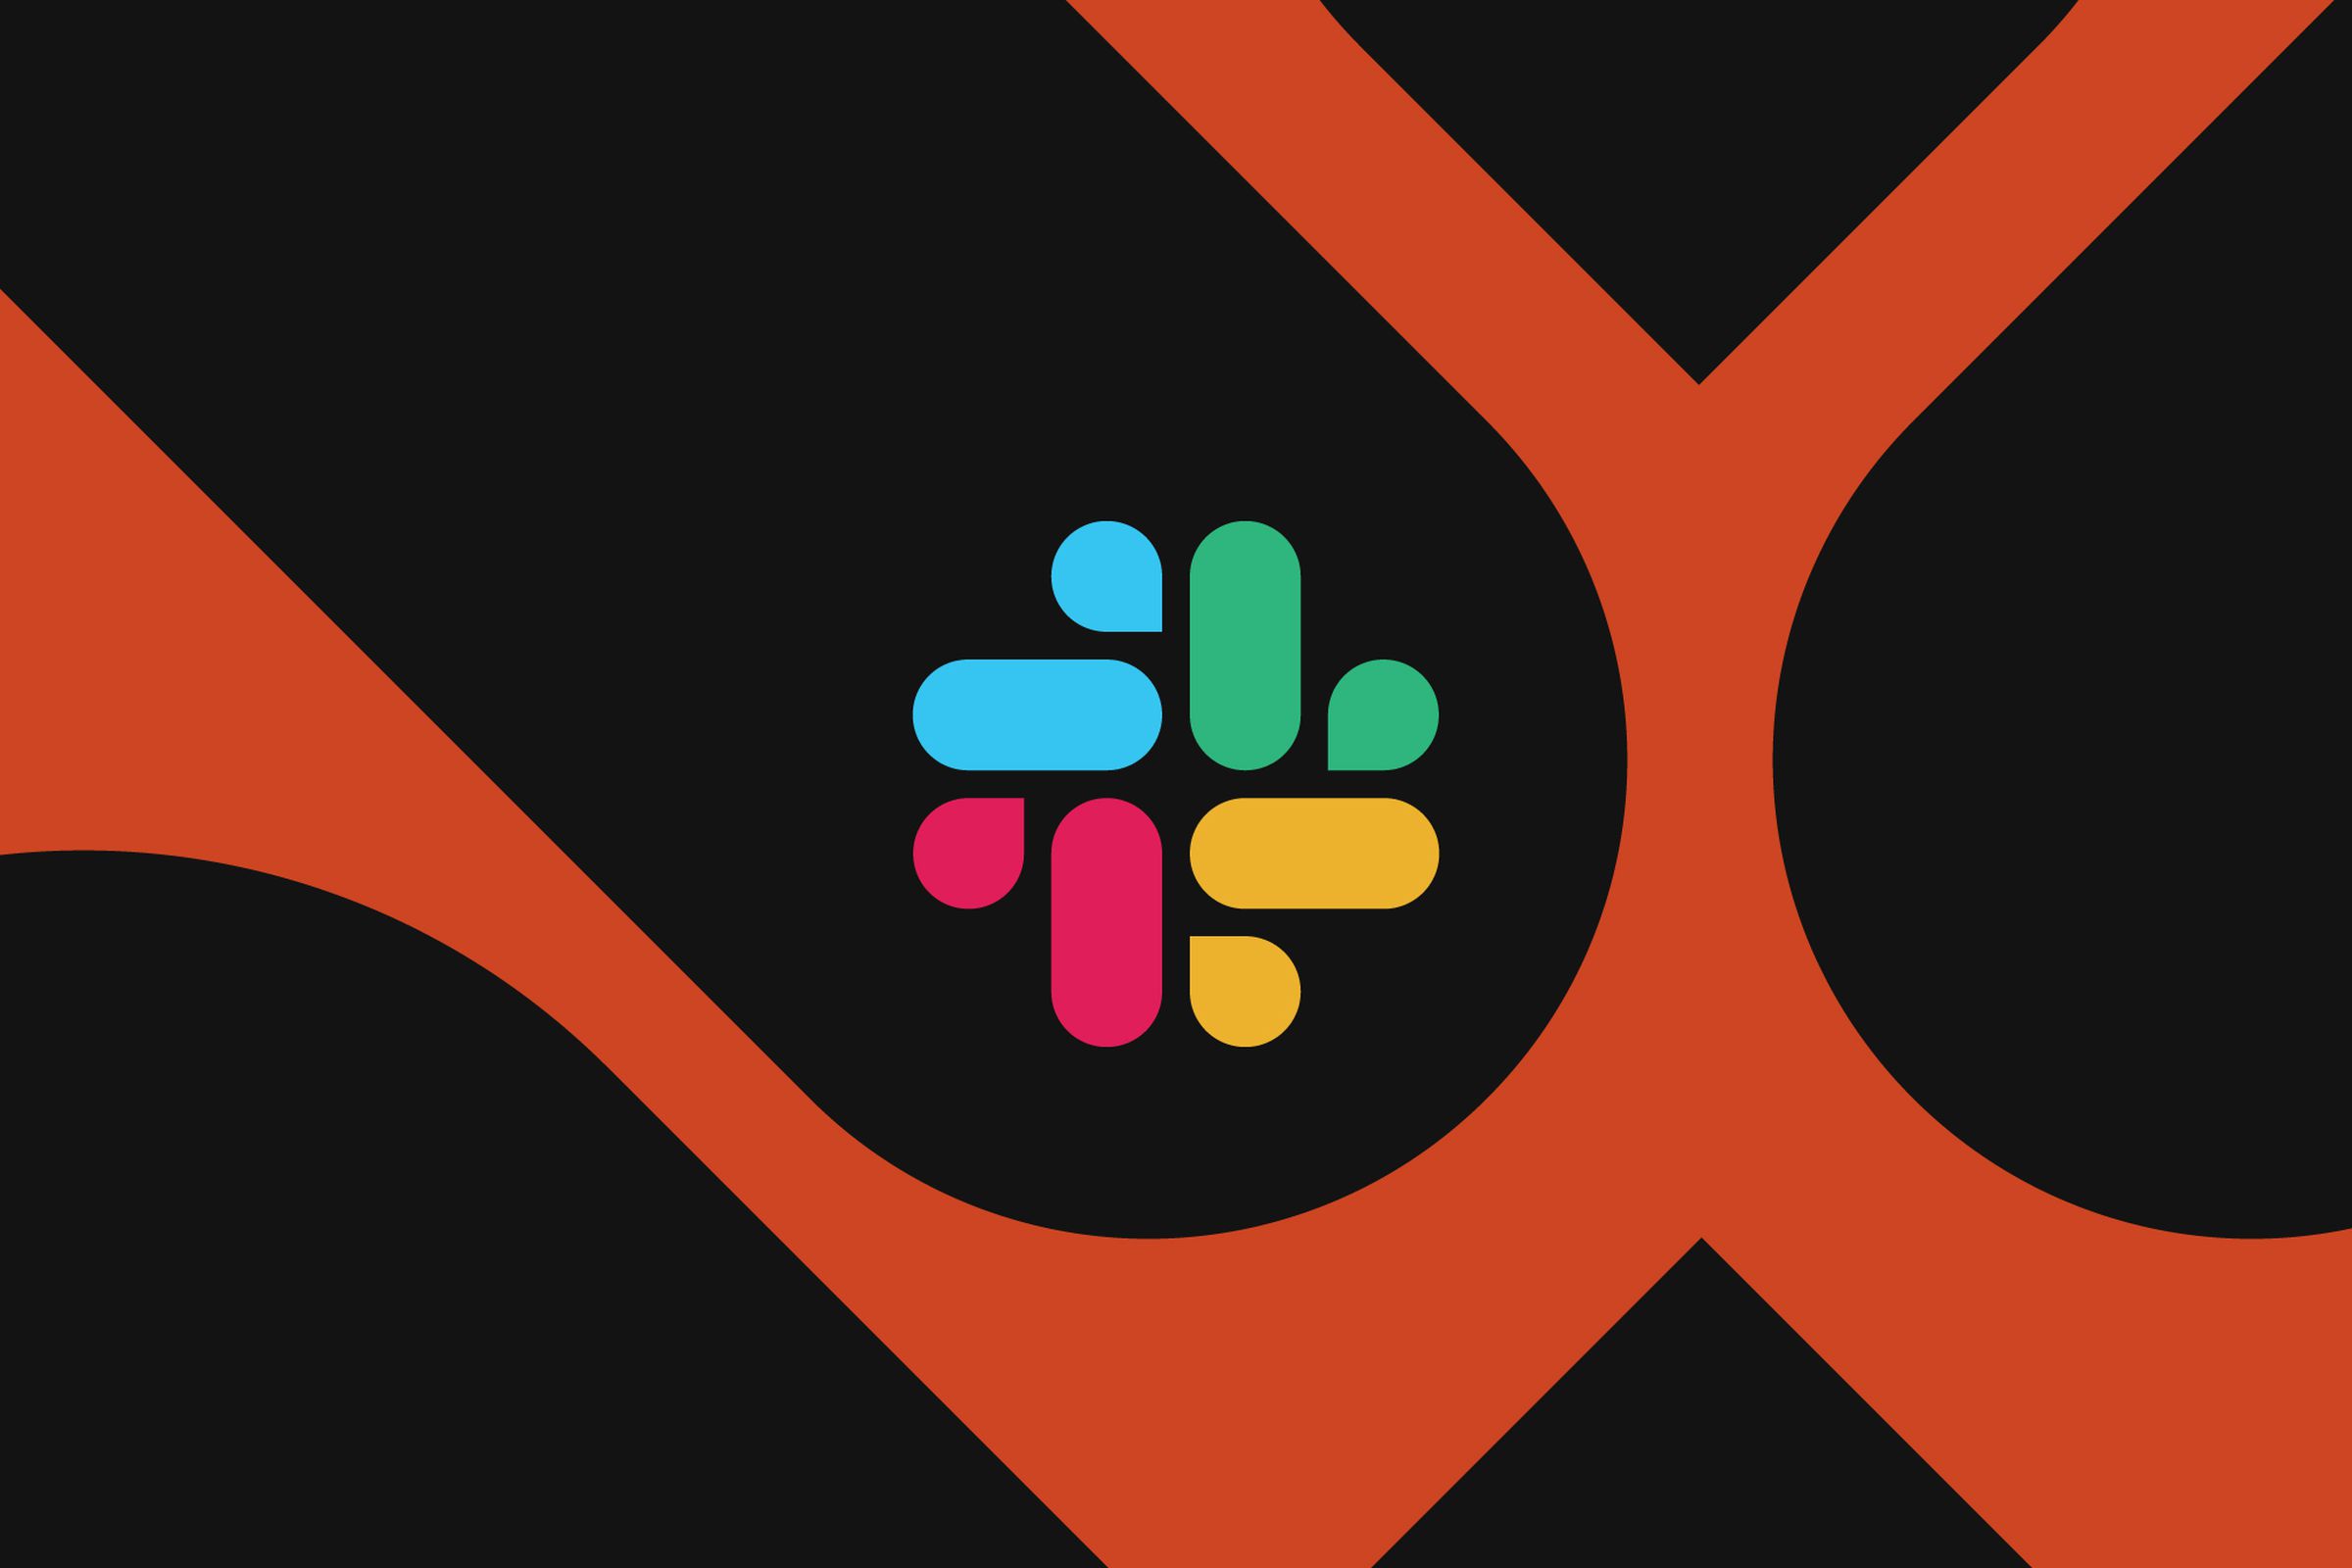 The Slack logo against a red and black backdrop.